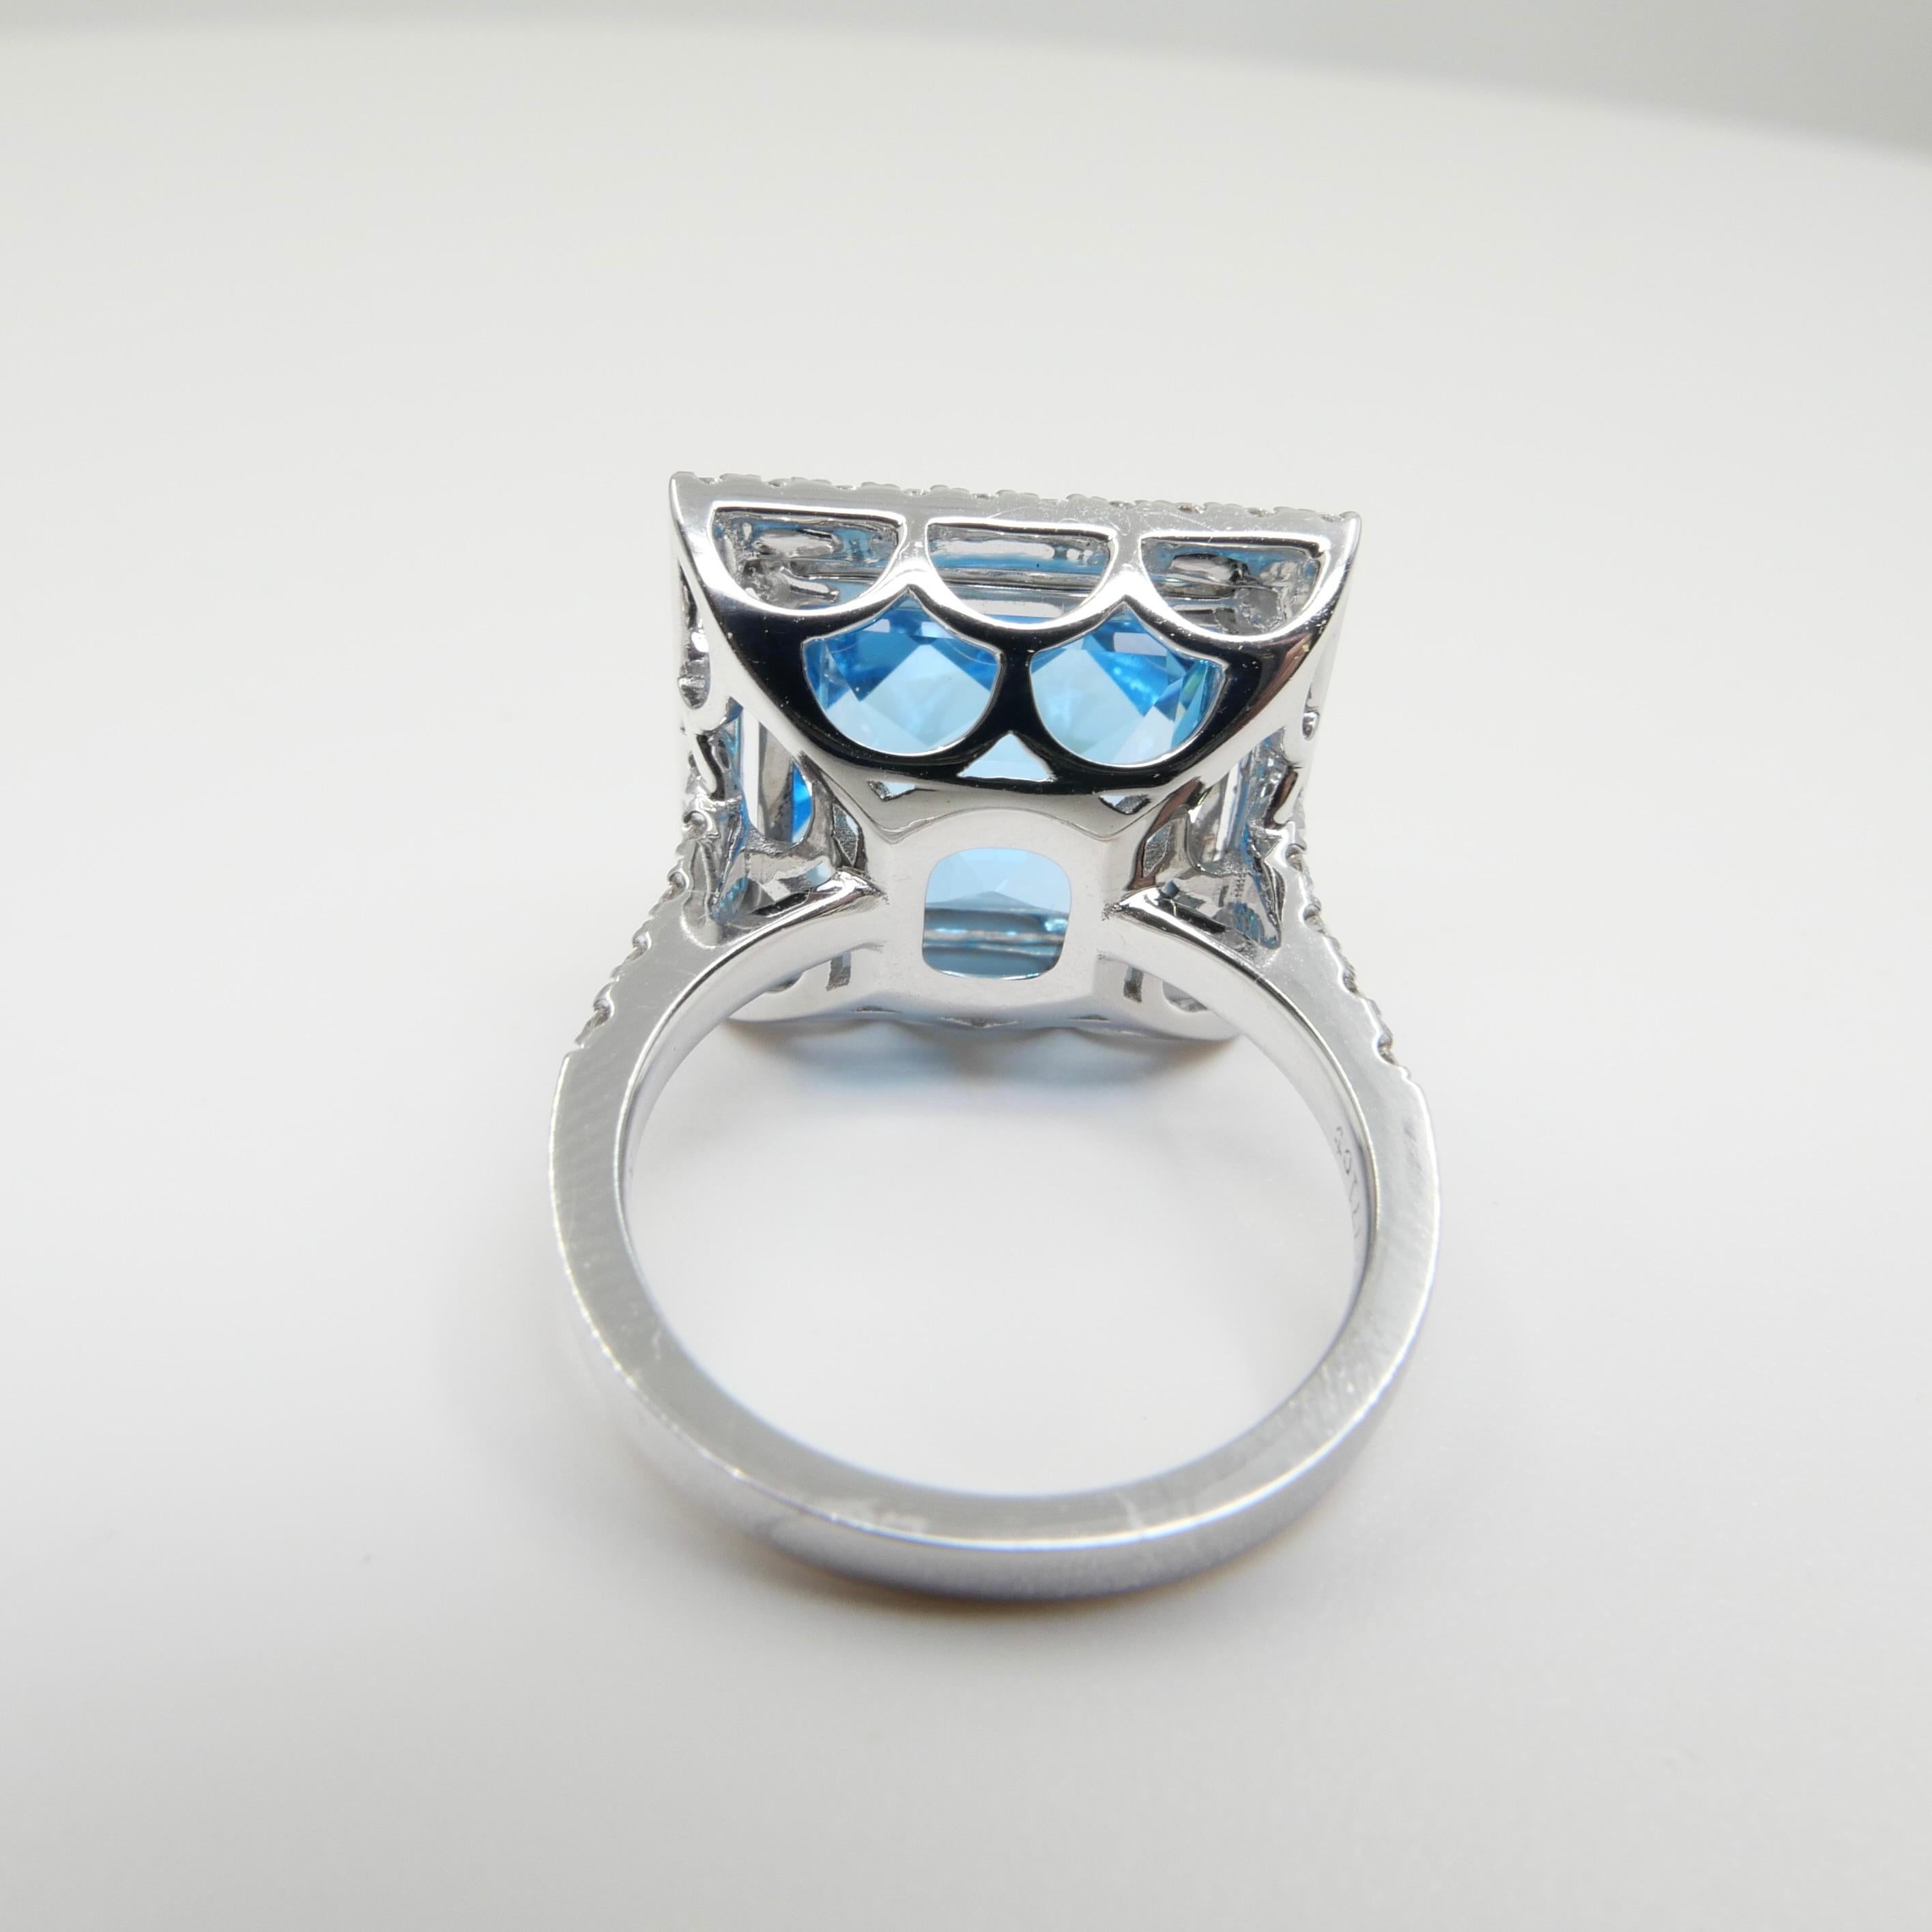  13 Cts checker Square Cut Blue Topaz & Diamond Cocktail Ring. Big Statement. For Sale 10